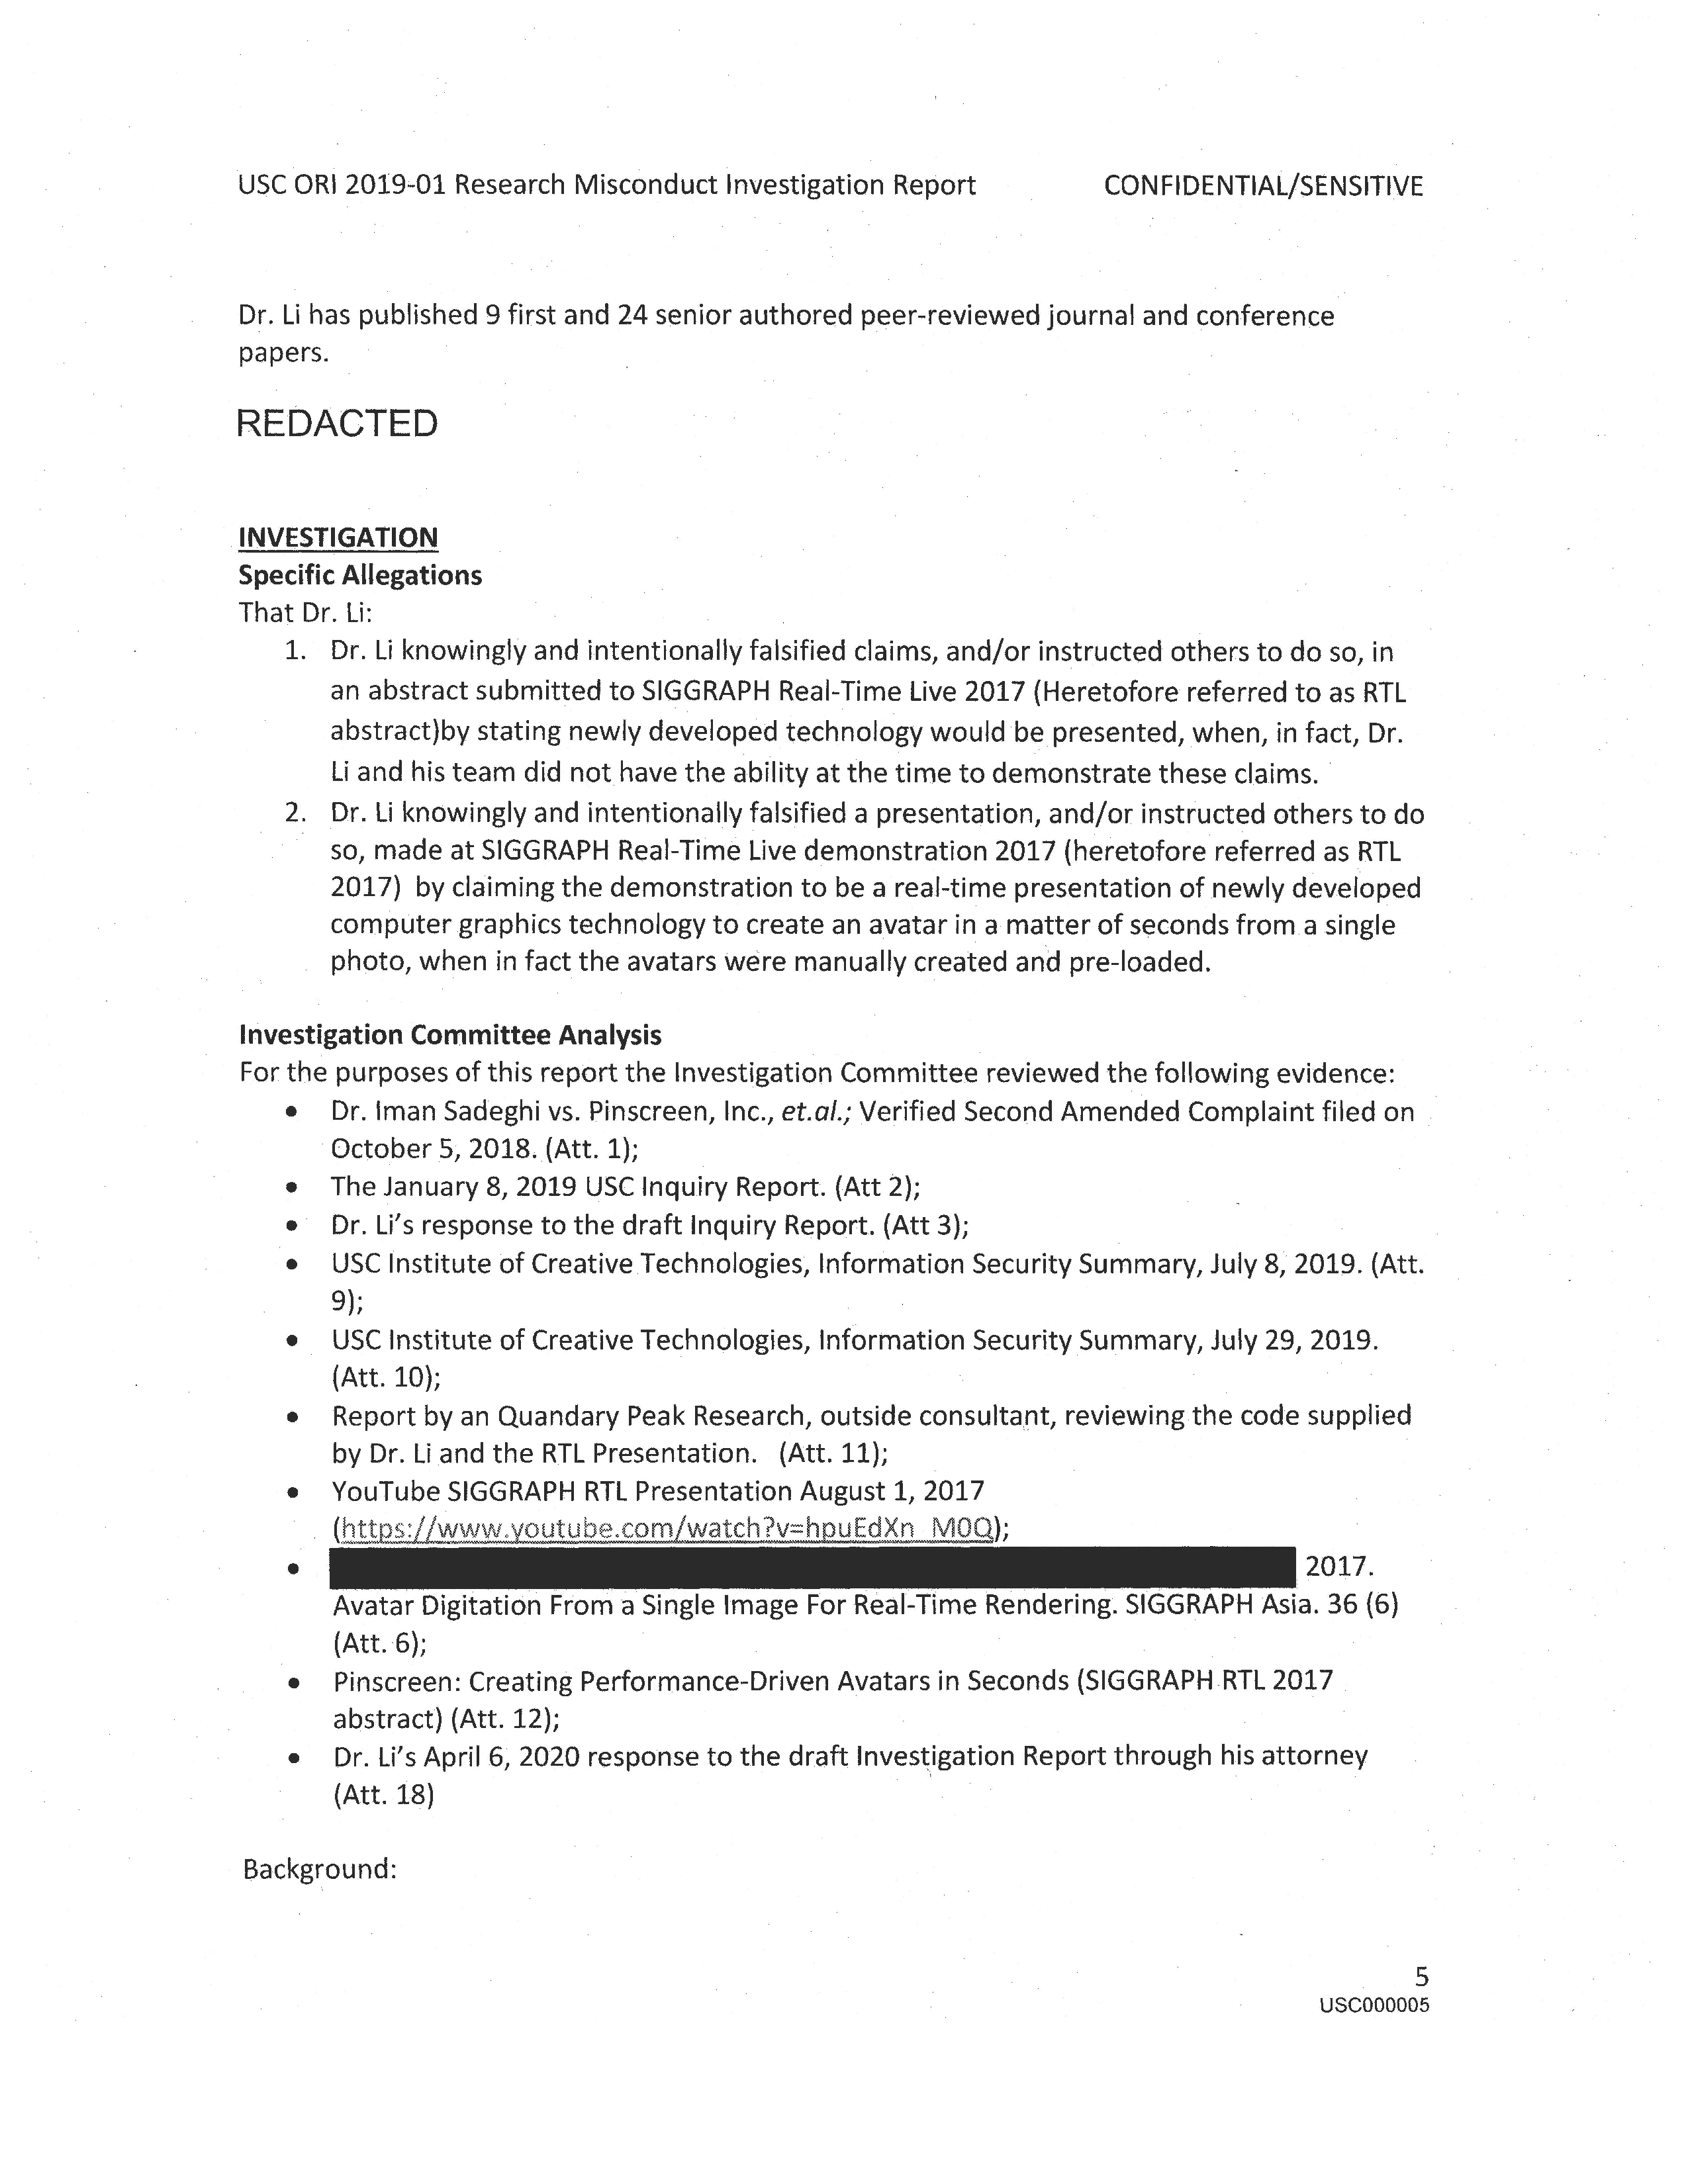 USC's Investigation Report re Hao Li's and Pinscreen's Scientific Misconduct at ACM SIGGRAPH RTL 2017 [Summary] Page 7